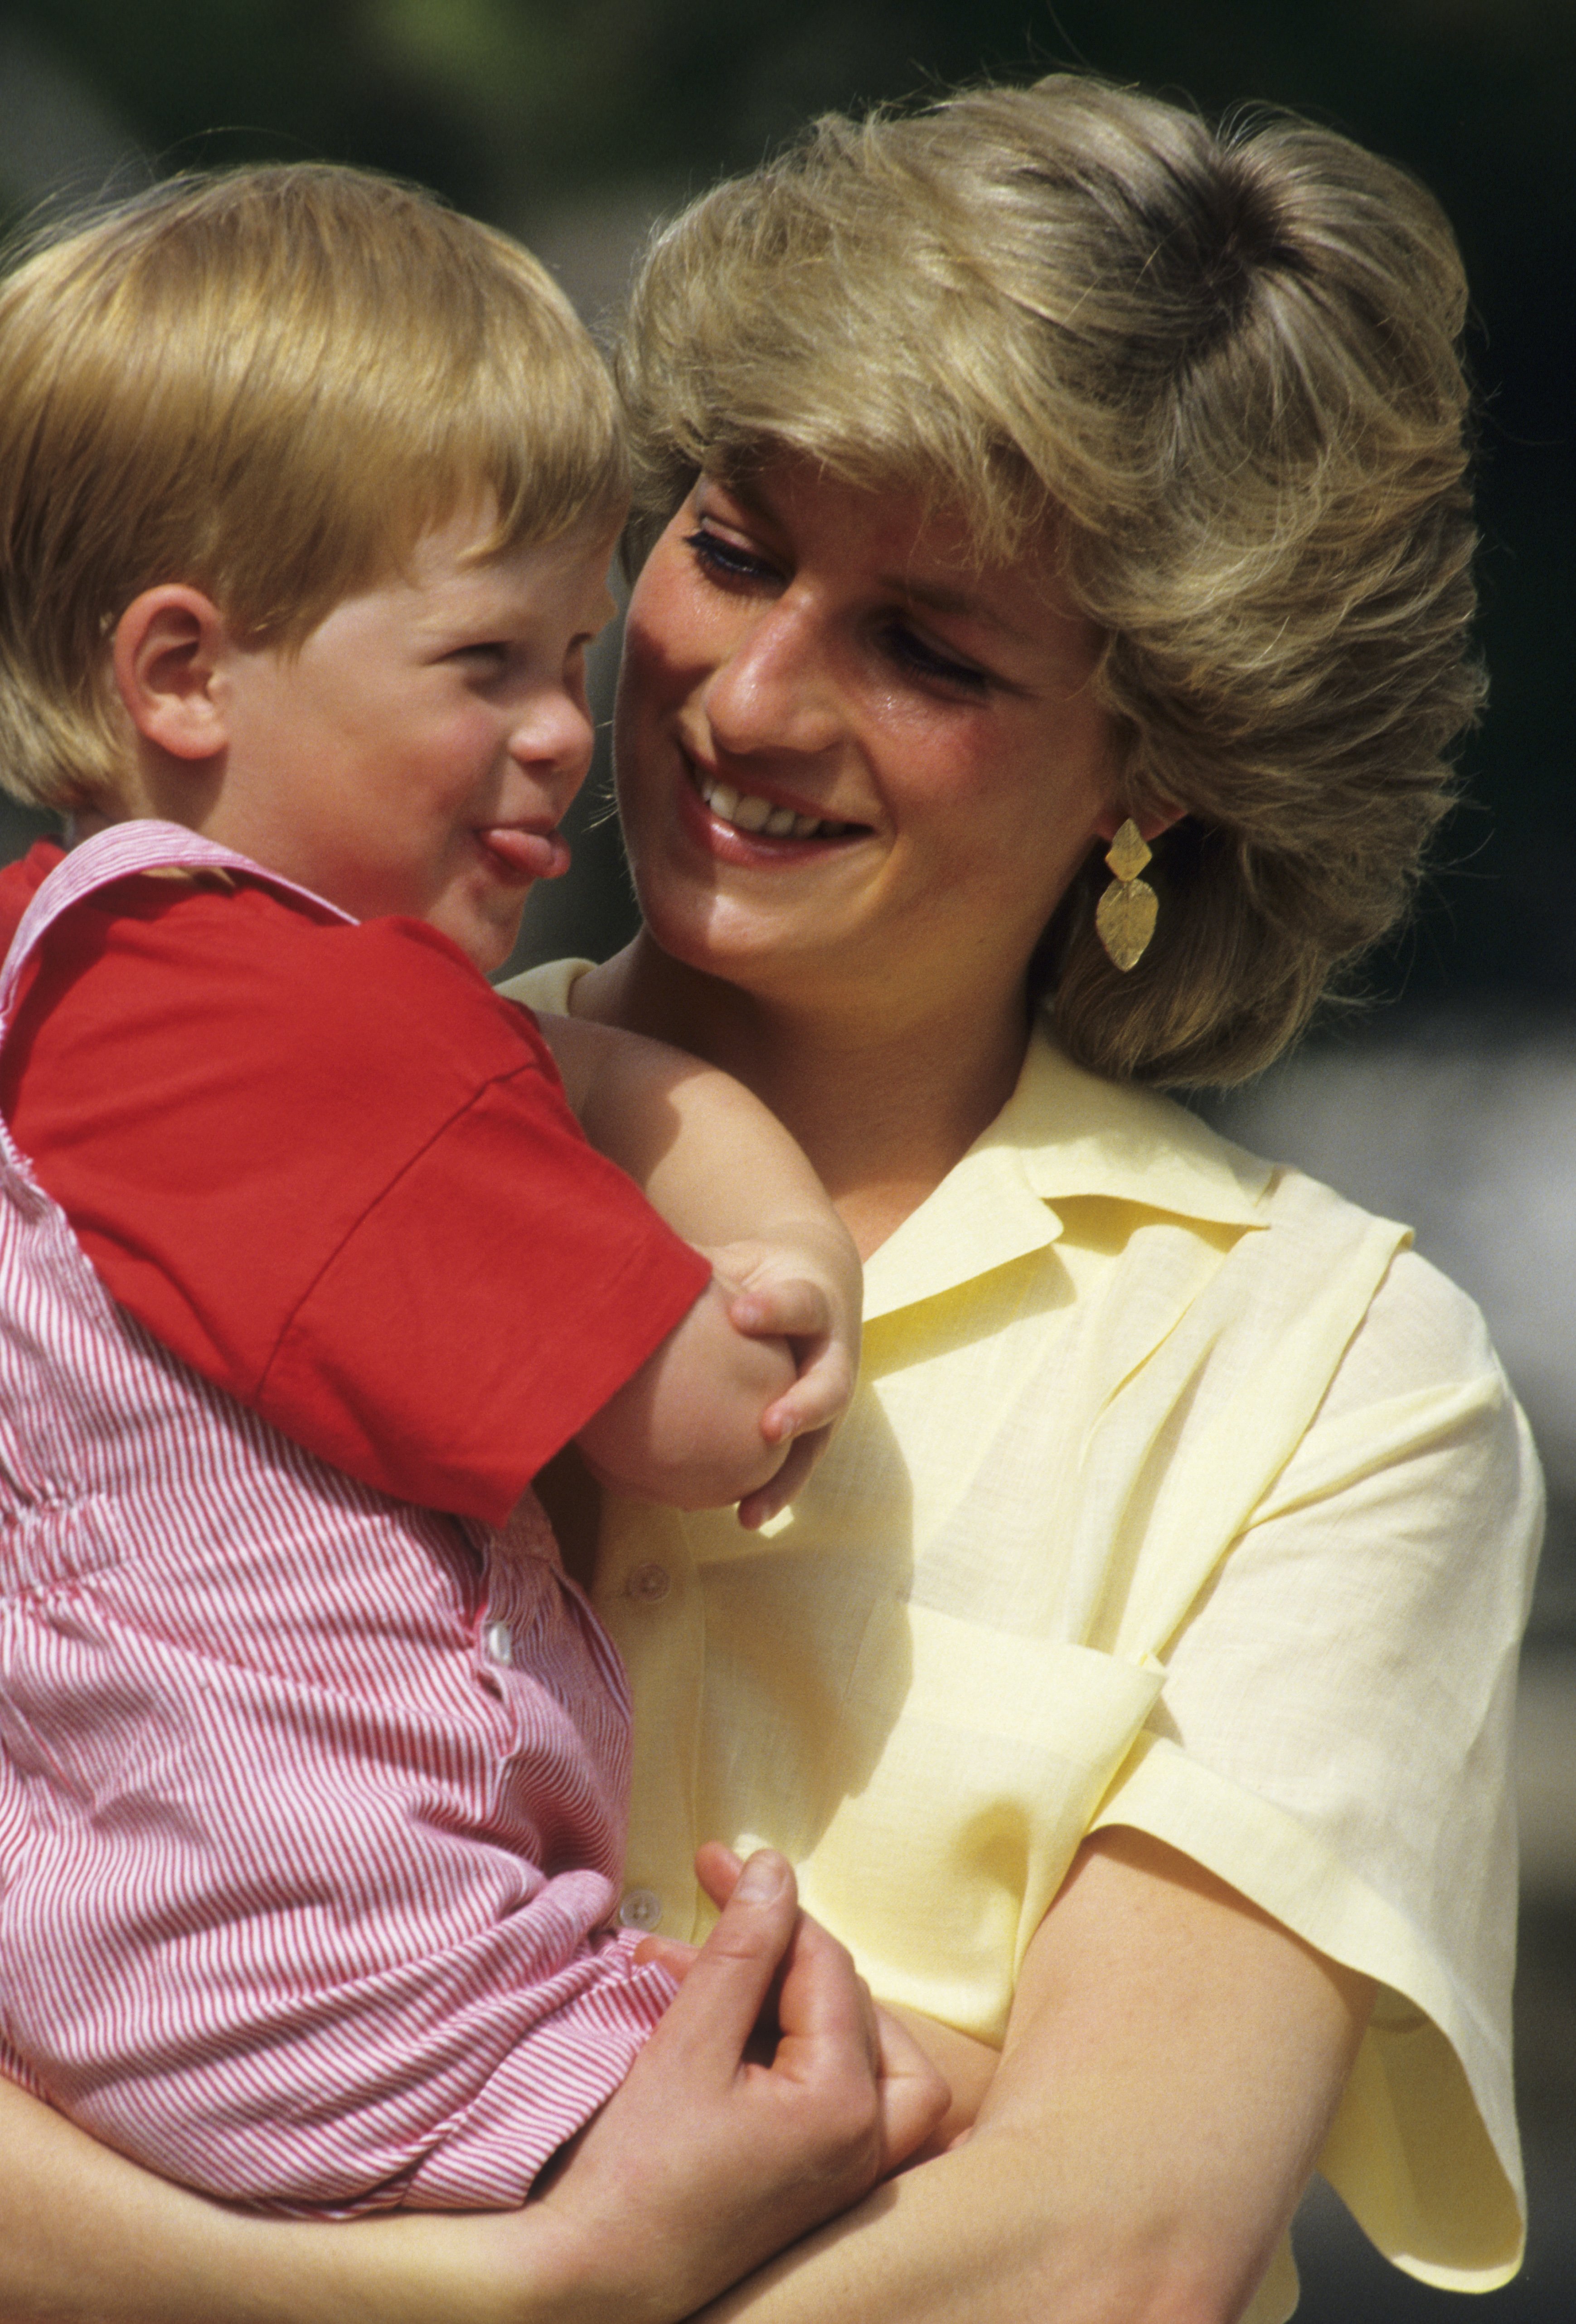 Princess Diana pictured with Prince Harry on holiday on August 10, 1987 in Majorca, Spain . / Source: Getty Images